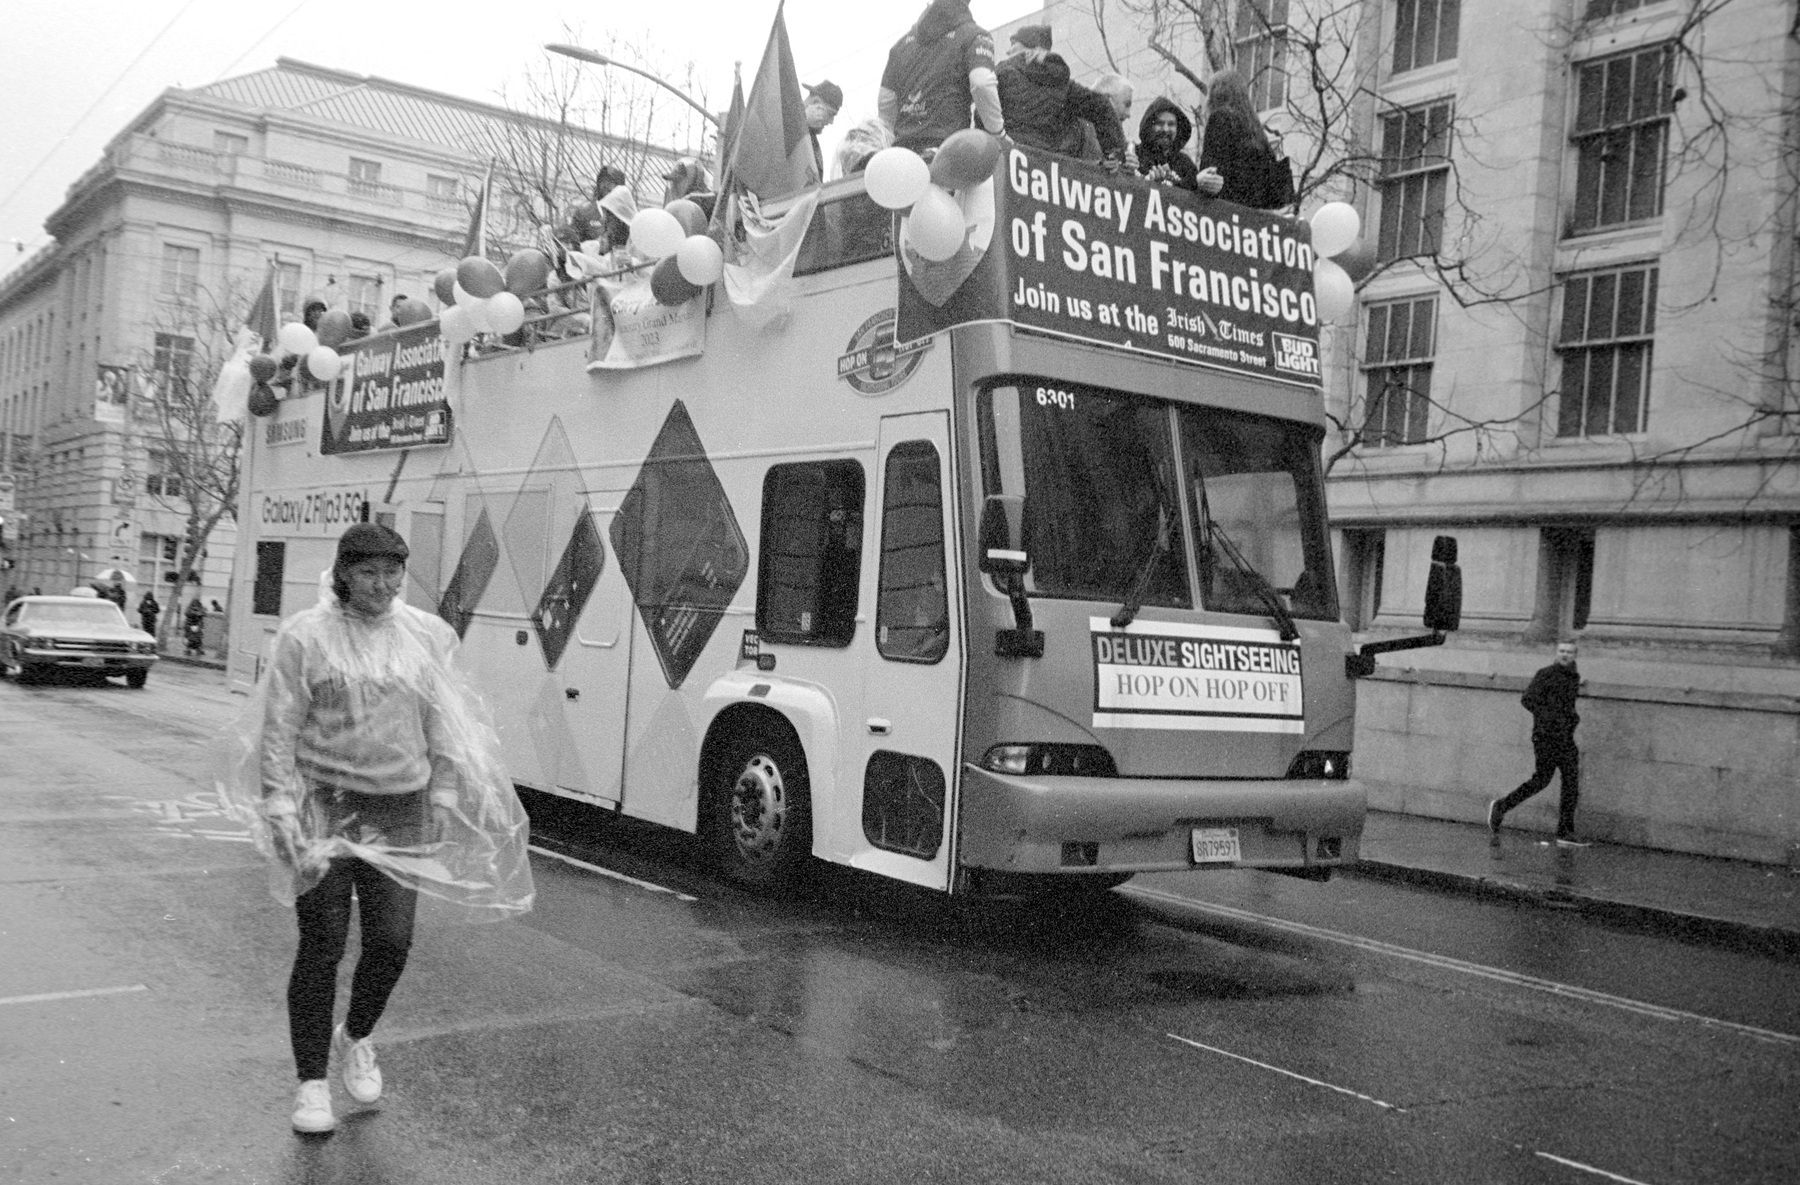 a scan of a black and white photograph of a bus that says Galway Association of San Francisco with people in it, and a person walking alongside the bus with a poncho